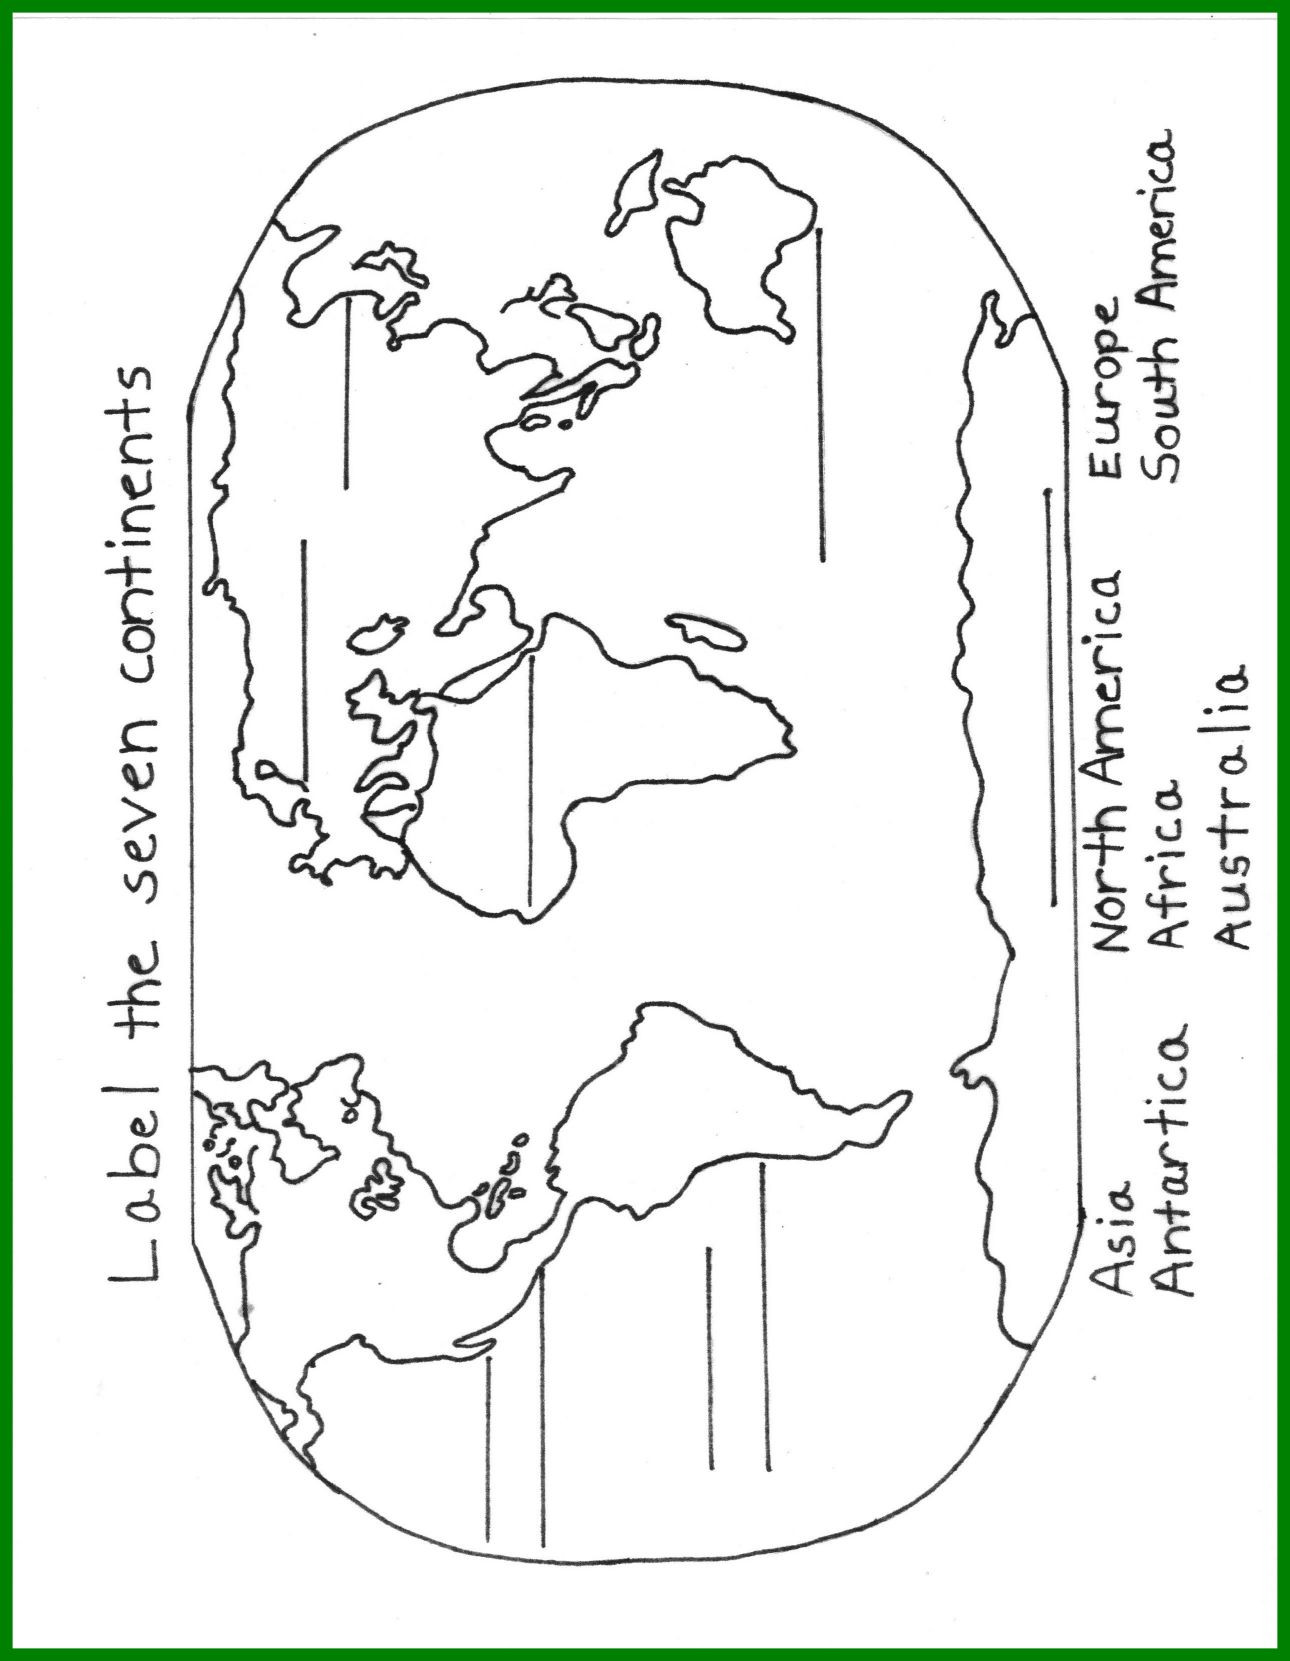 7 Continents Printable Map New Continent Coloring Pages 10 For Continents Page Within Frabbi